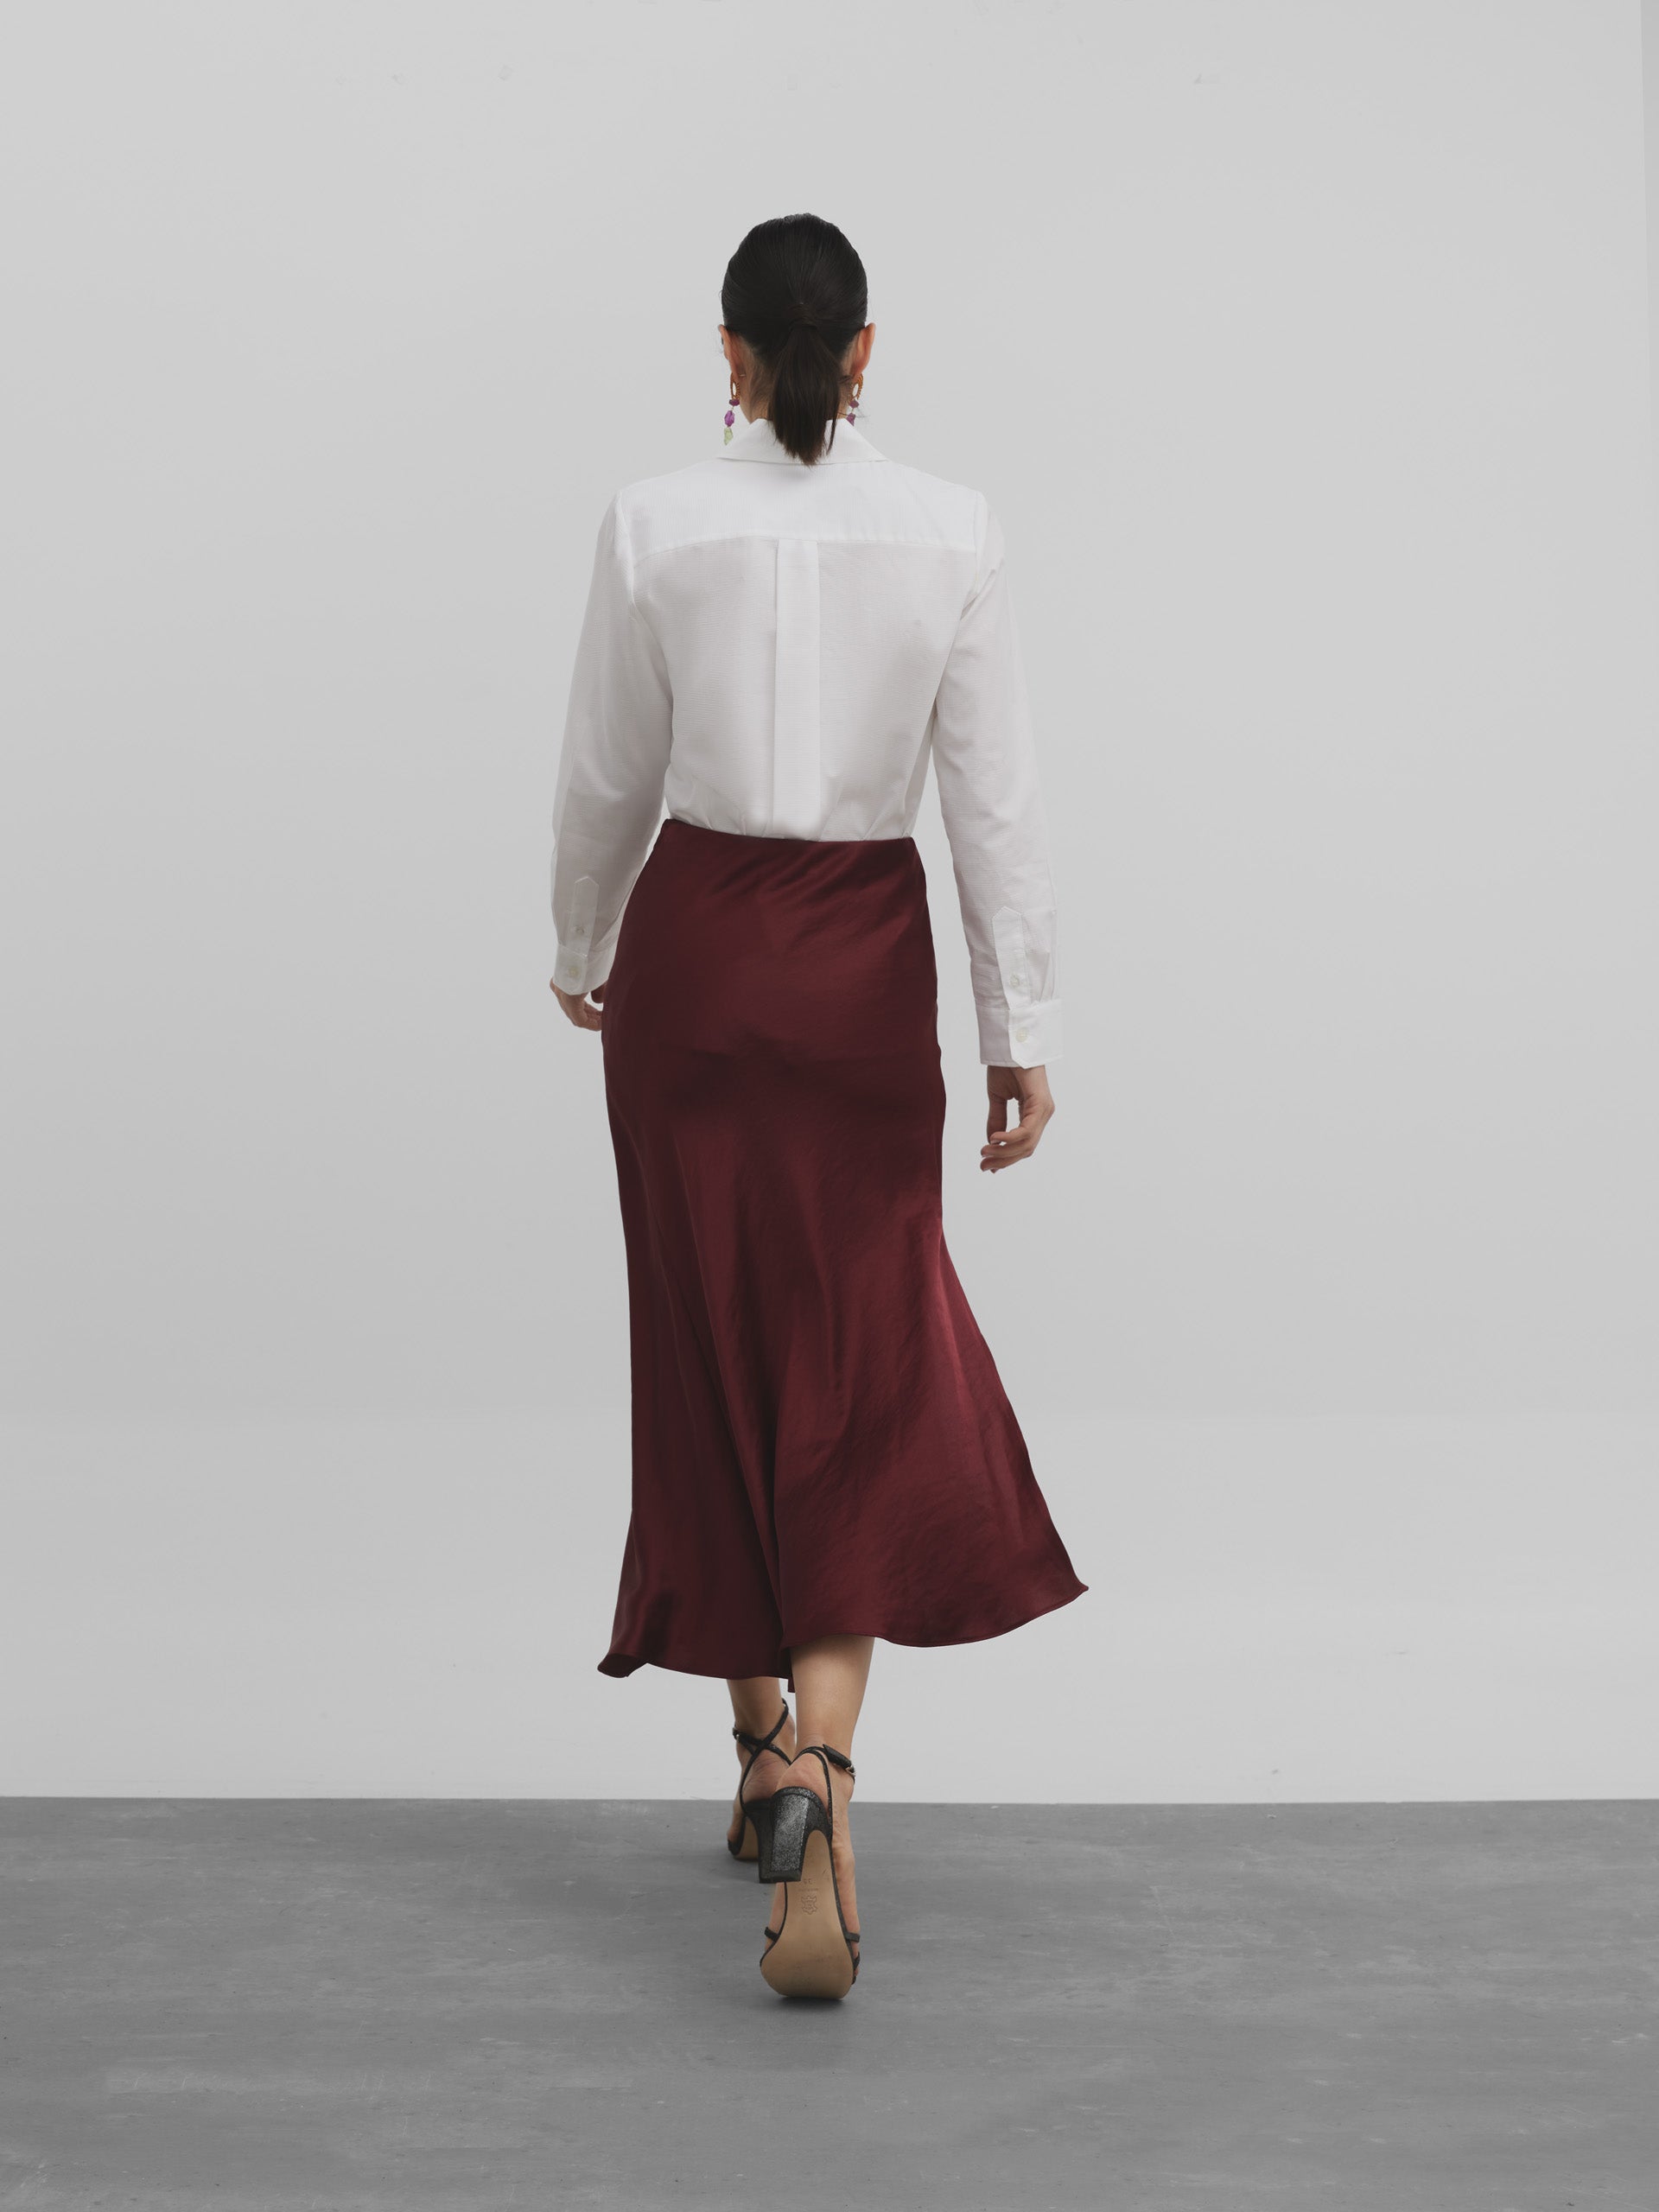 15 Silky Skirts To Buy Now | Satin skirt street style, Fashion, Fashion  outfits